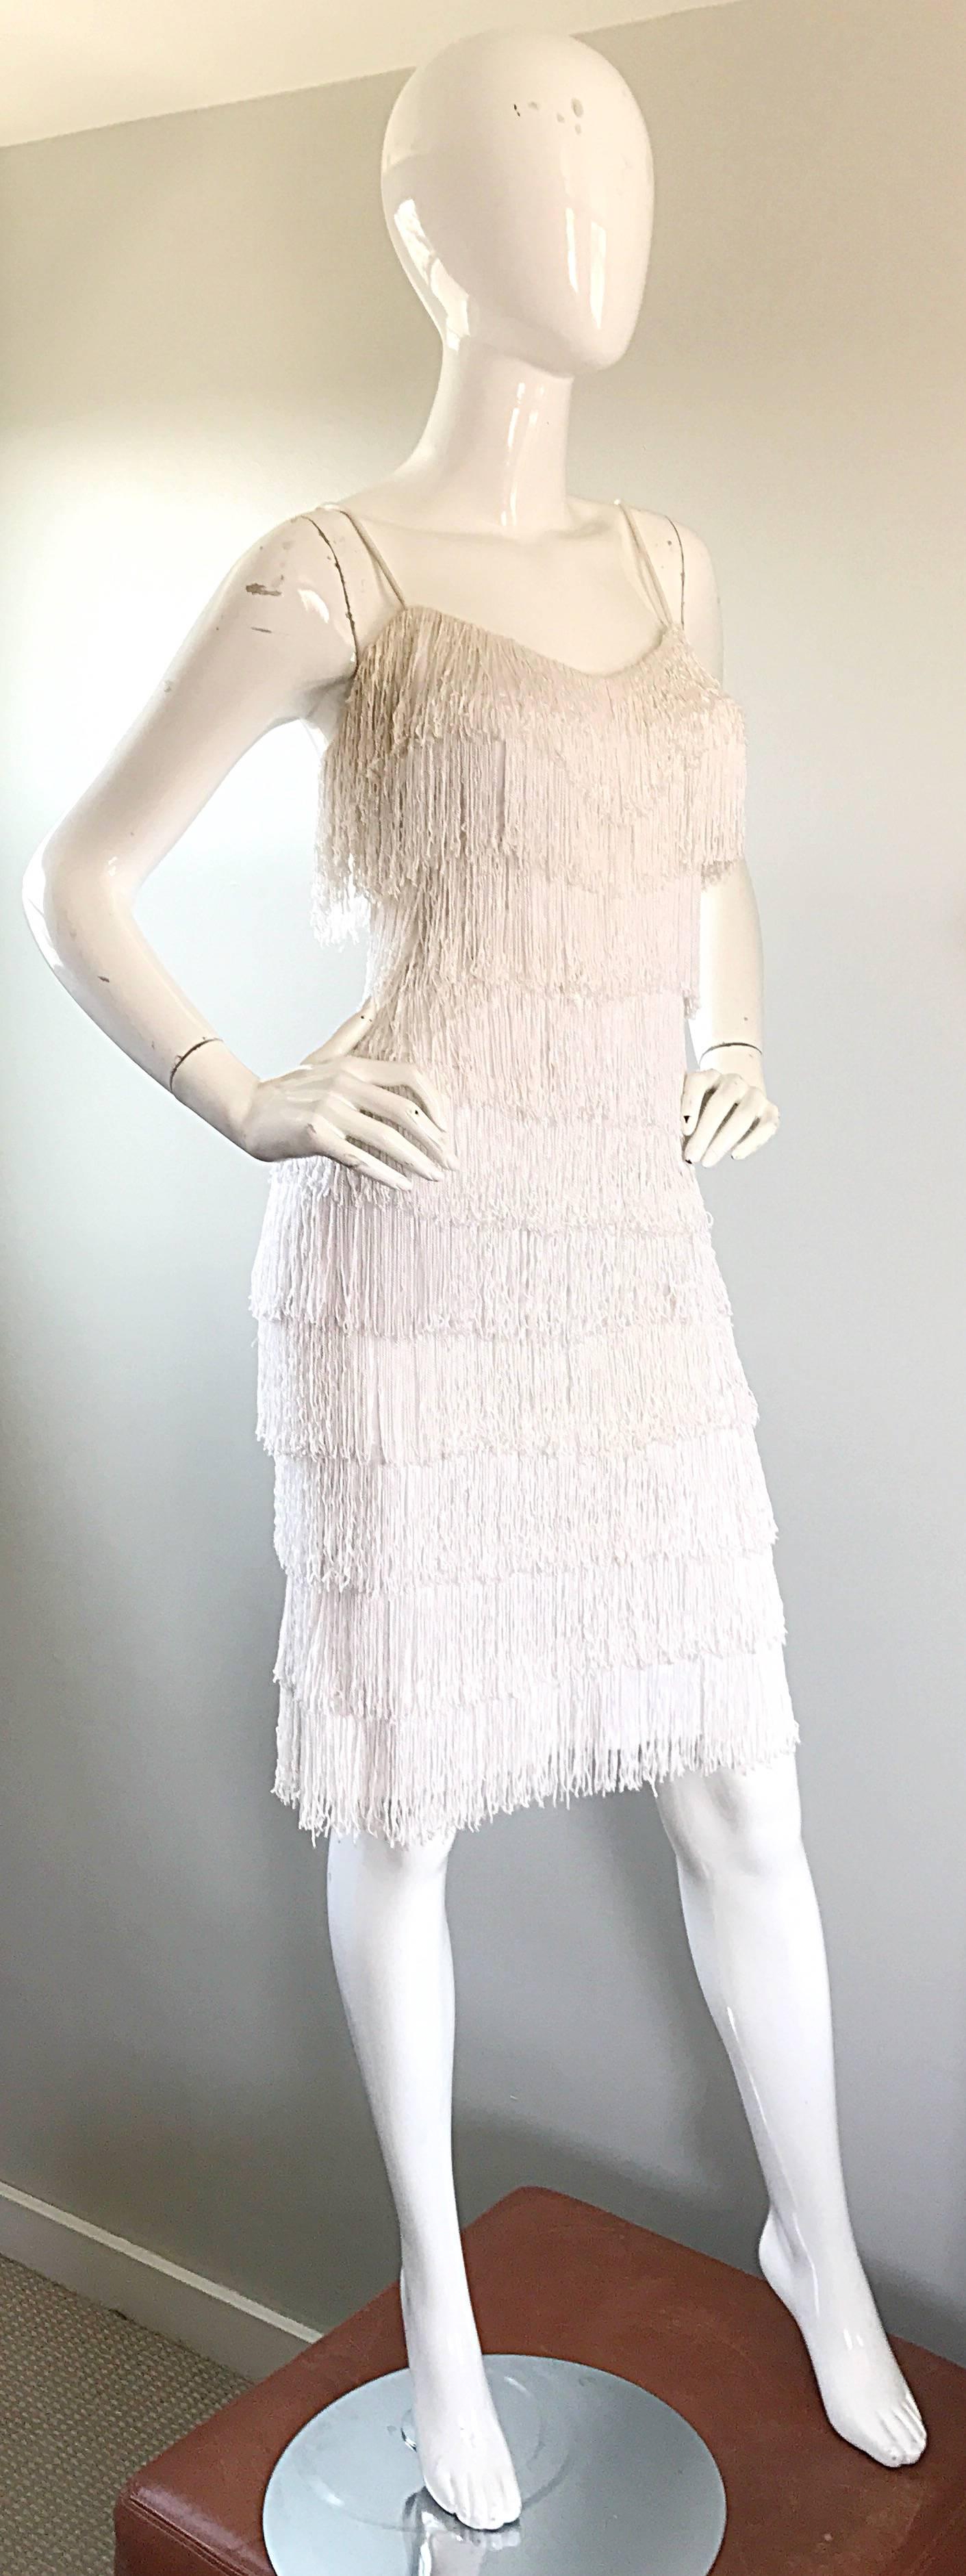 Women's Incredible Vintage 1970s Does 1920s White Fully Fringed Jersey Flapper Dress